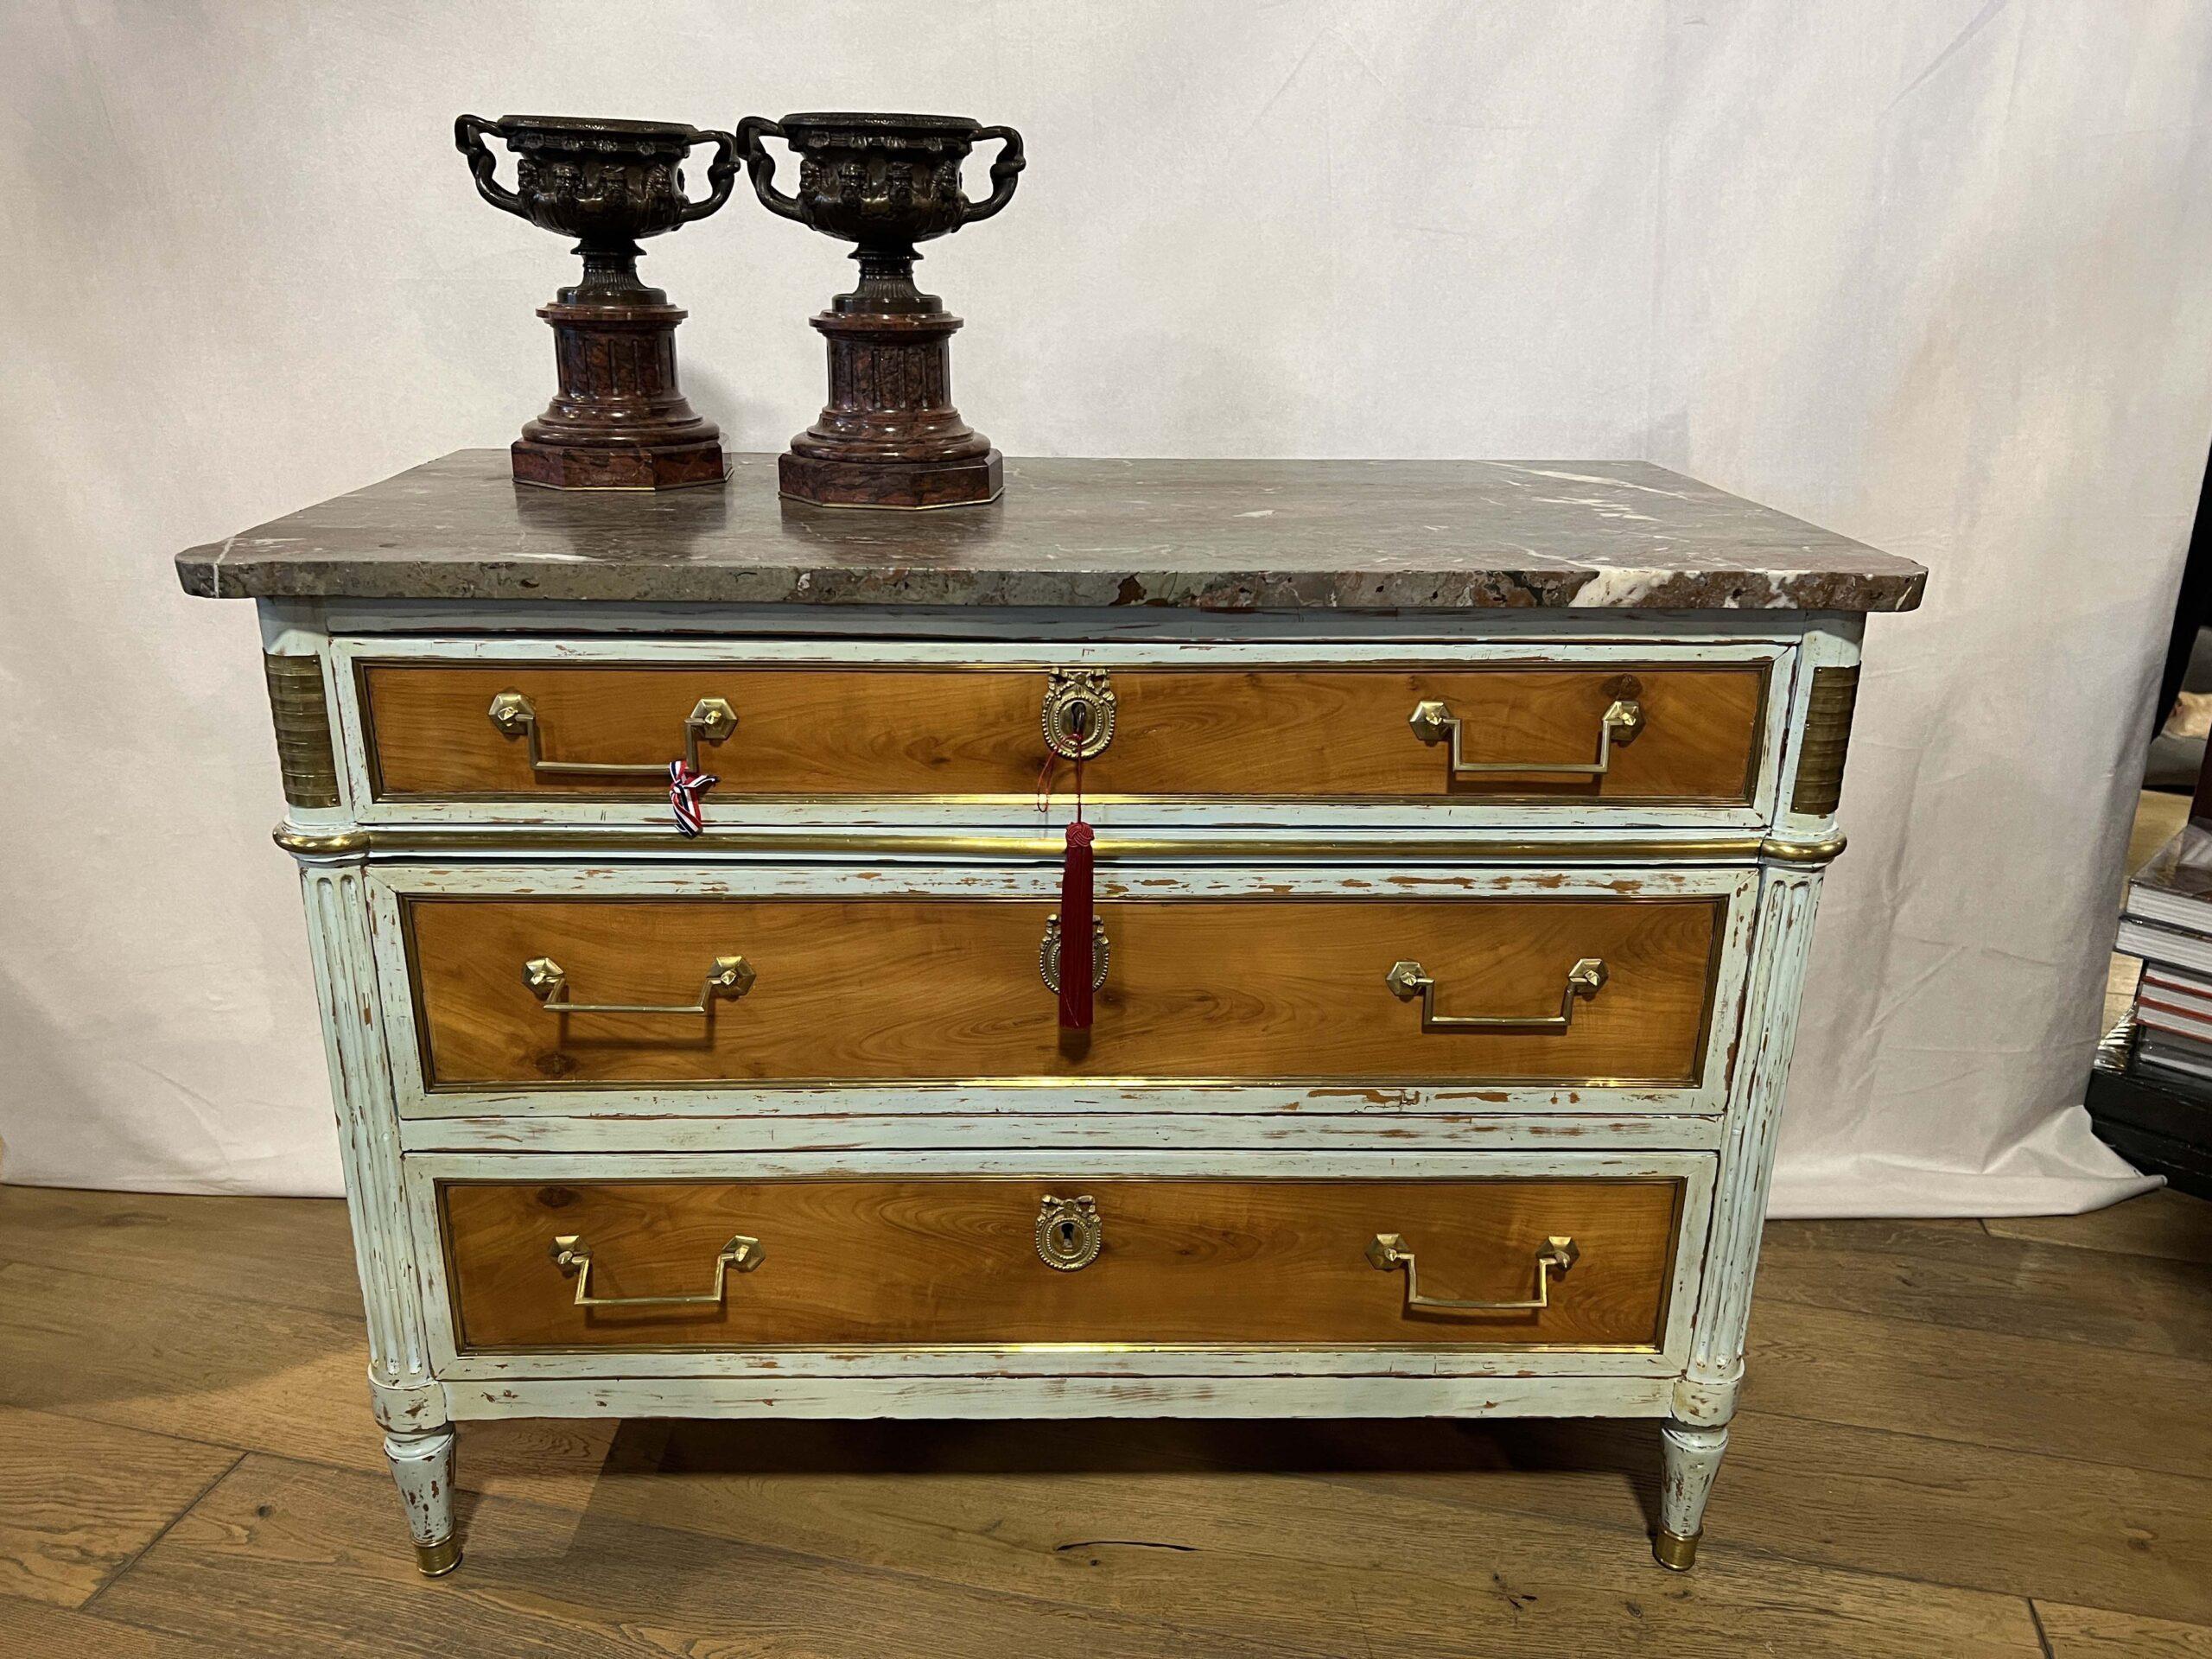 
18th Century French Louis XVI Fruitwood Chest with the ORIGINAL blue paint.  The Specimen Marble is beautiful and the Original Hardware is Stunning.  Pictured urns on top are not included.